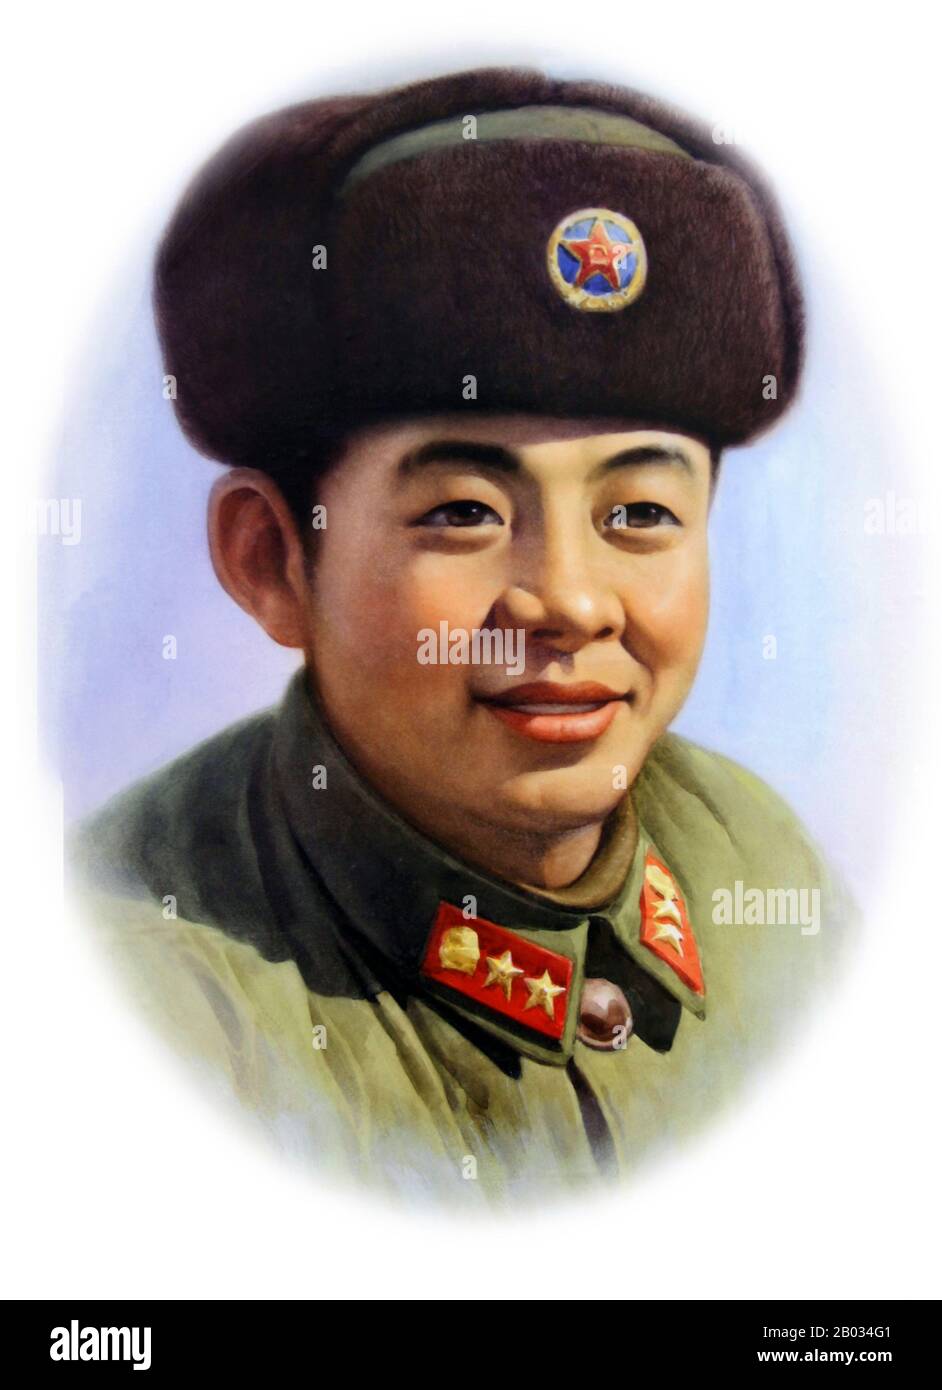 Lei Feng (18 December 1940  – 15 August 1962) was a soldier of the Chinese army in Communist legend. After his death, Lei was characterized as a selfless and modest person devoted to the Communist Party, Mao Zedong, and the people of China.  In 1963, he became the subject of a nationwide posthumous propaganda campaign, 'Follow the examples of Comrade Lei Feng'. Lei was portrayed as a model citizen, and the masses were encouraged to emulate his selflessness, modesty, and devotion to Mao.  After Mao's death, Lei Feng remained a cultural icon representing earnestness and service. His name entered Stock Photo